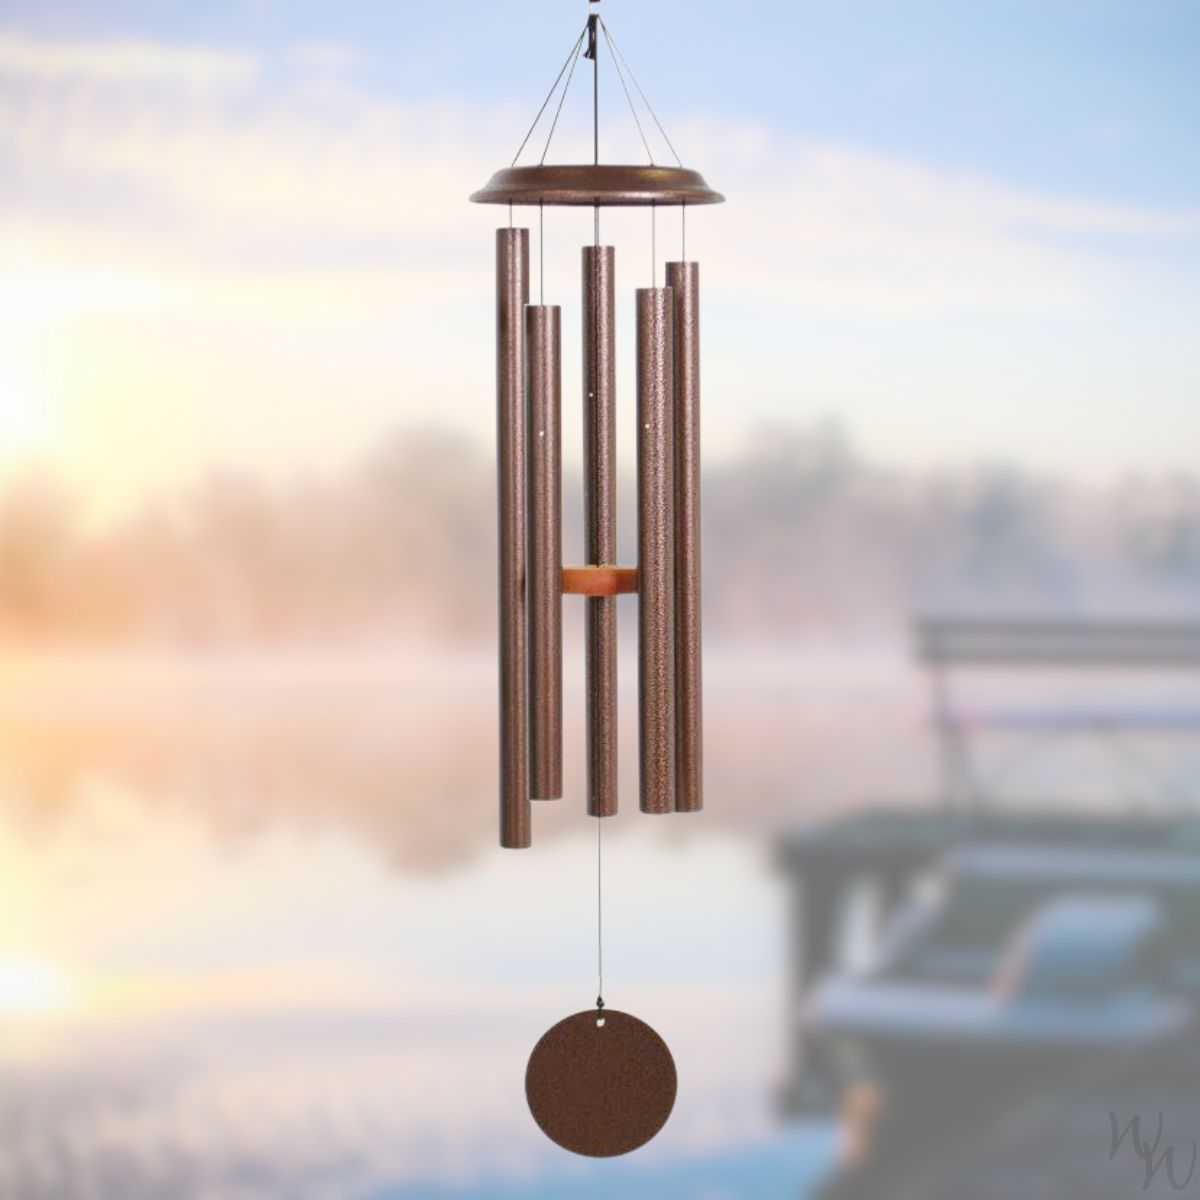 Shenandoah Melodies 42 Inch Copper Vein Wind Chime - Scale Of D